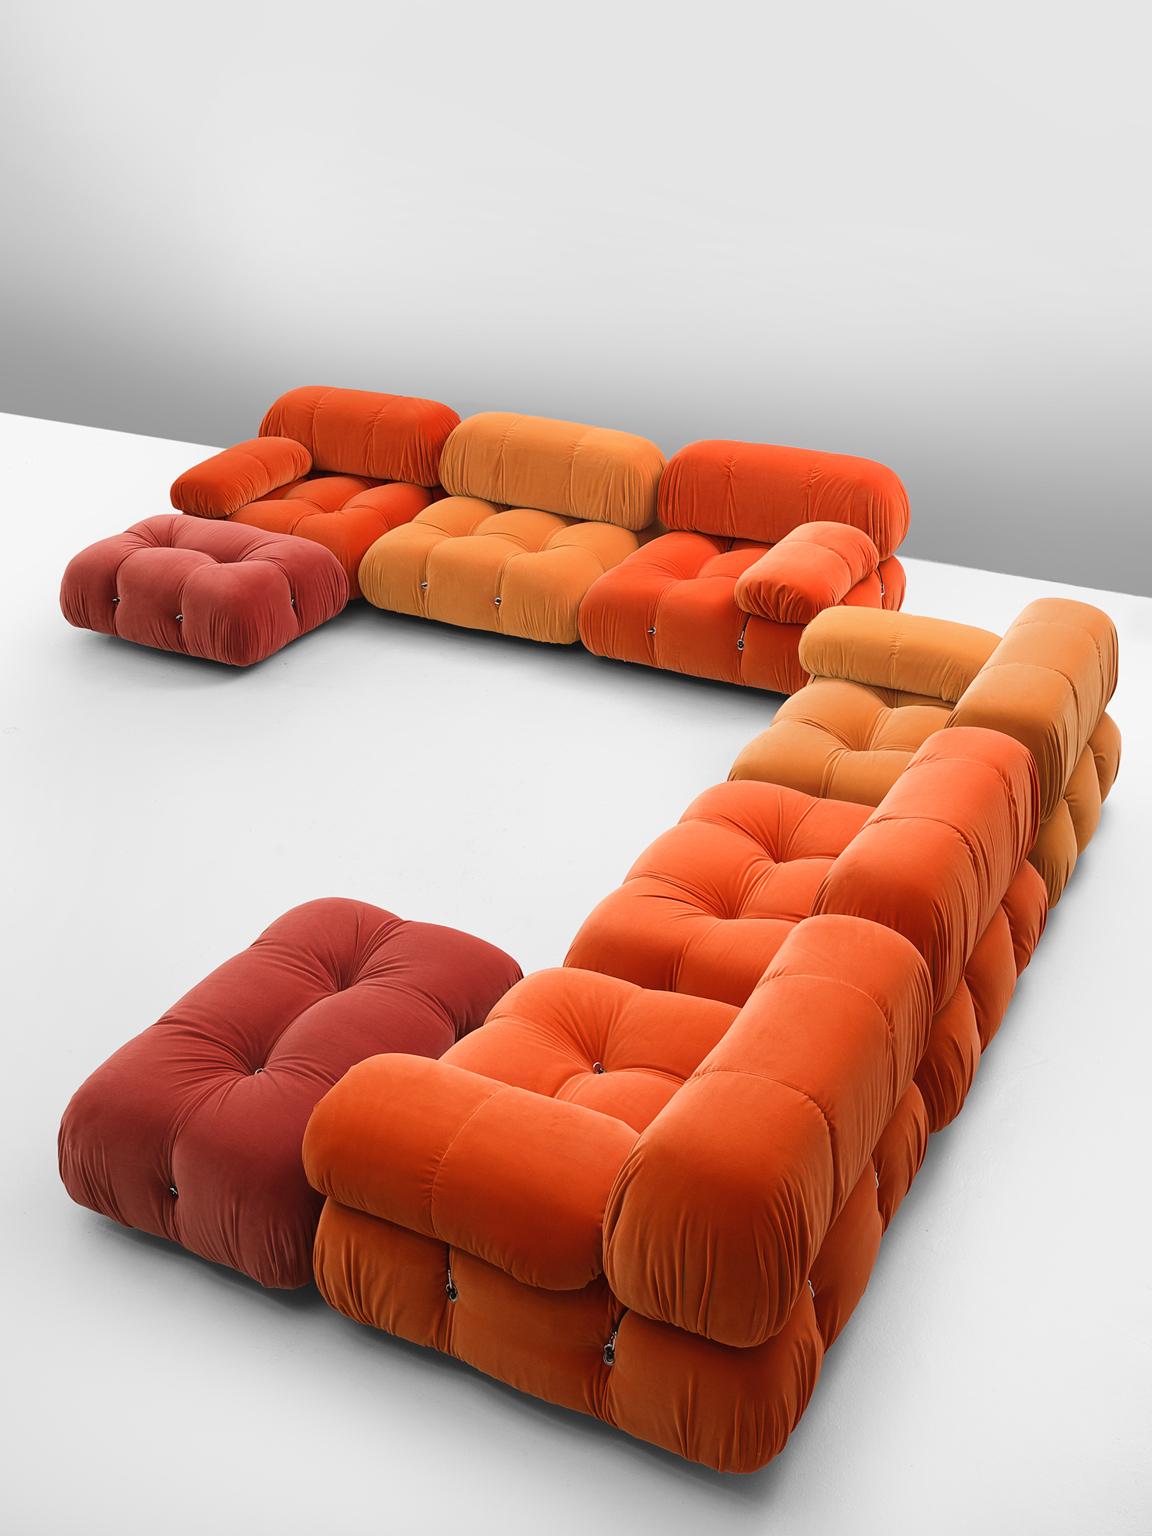 Mario Bellini, 'Camaleonda' sofa, in orange upholstery by Italy, 1972.

This sofa is made on request in our upholstery atelier. The sectional elements this sofa was made with, can be used freely and apart from one another. The backs and armrests